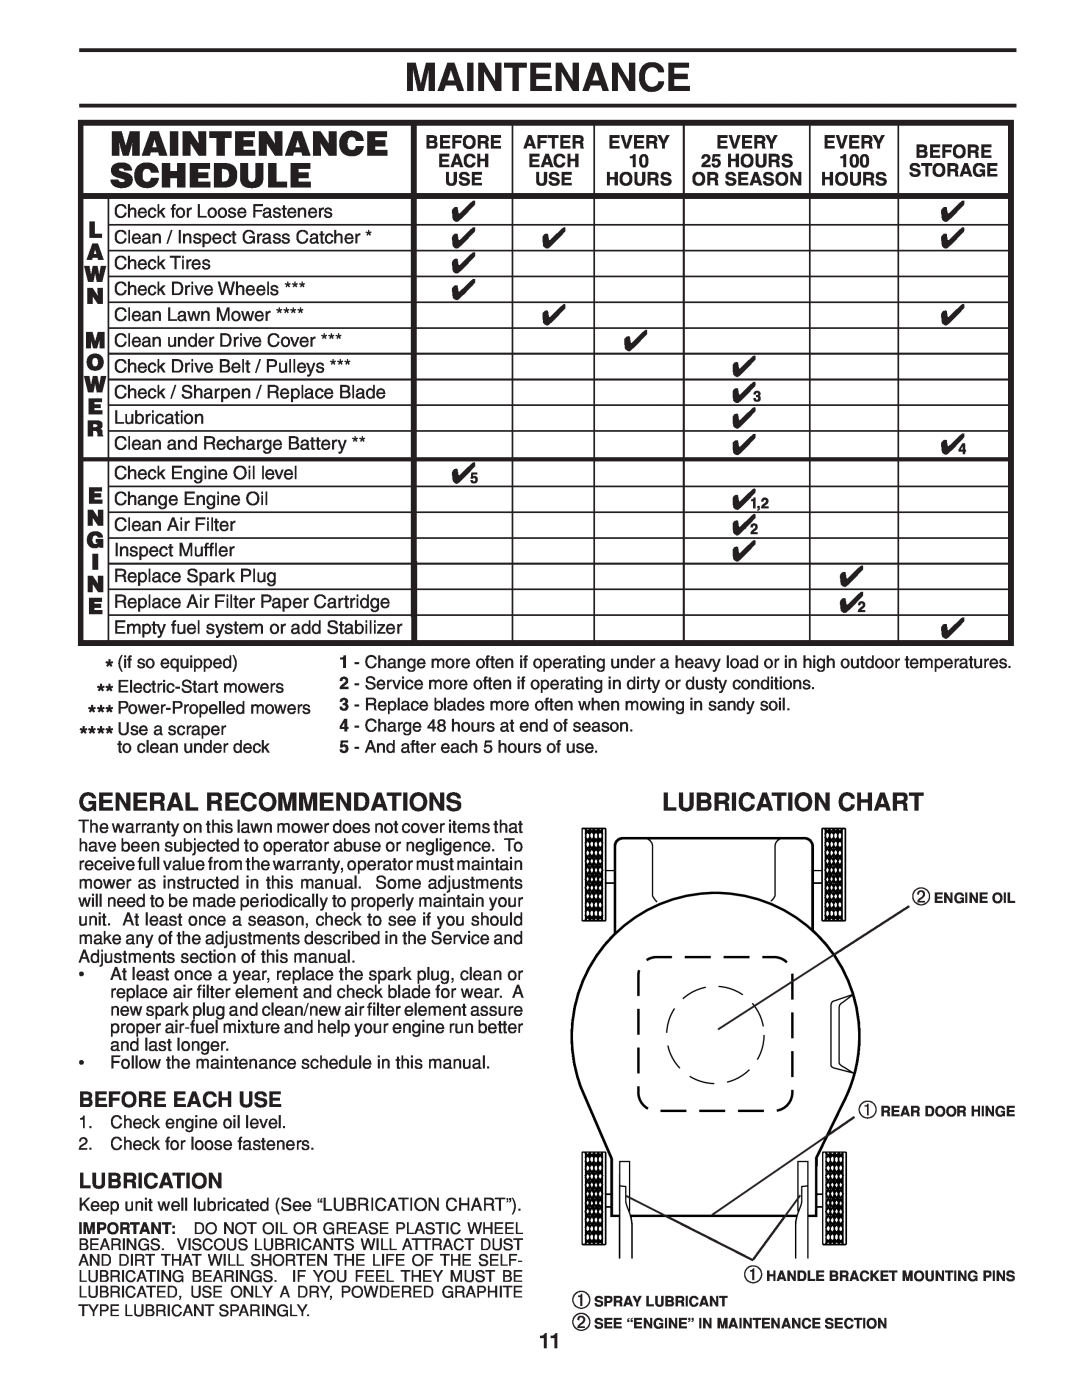 Husqvarna HU800BBC Maintenance, General Recommendations, Lubrication Chart, Before Each Use, After, Every, Storage, Hours 